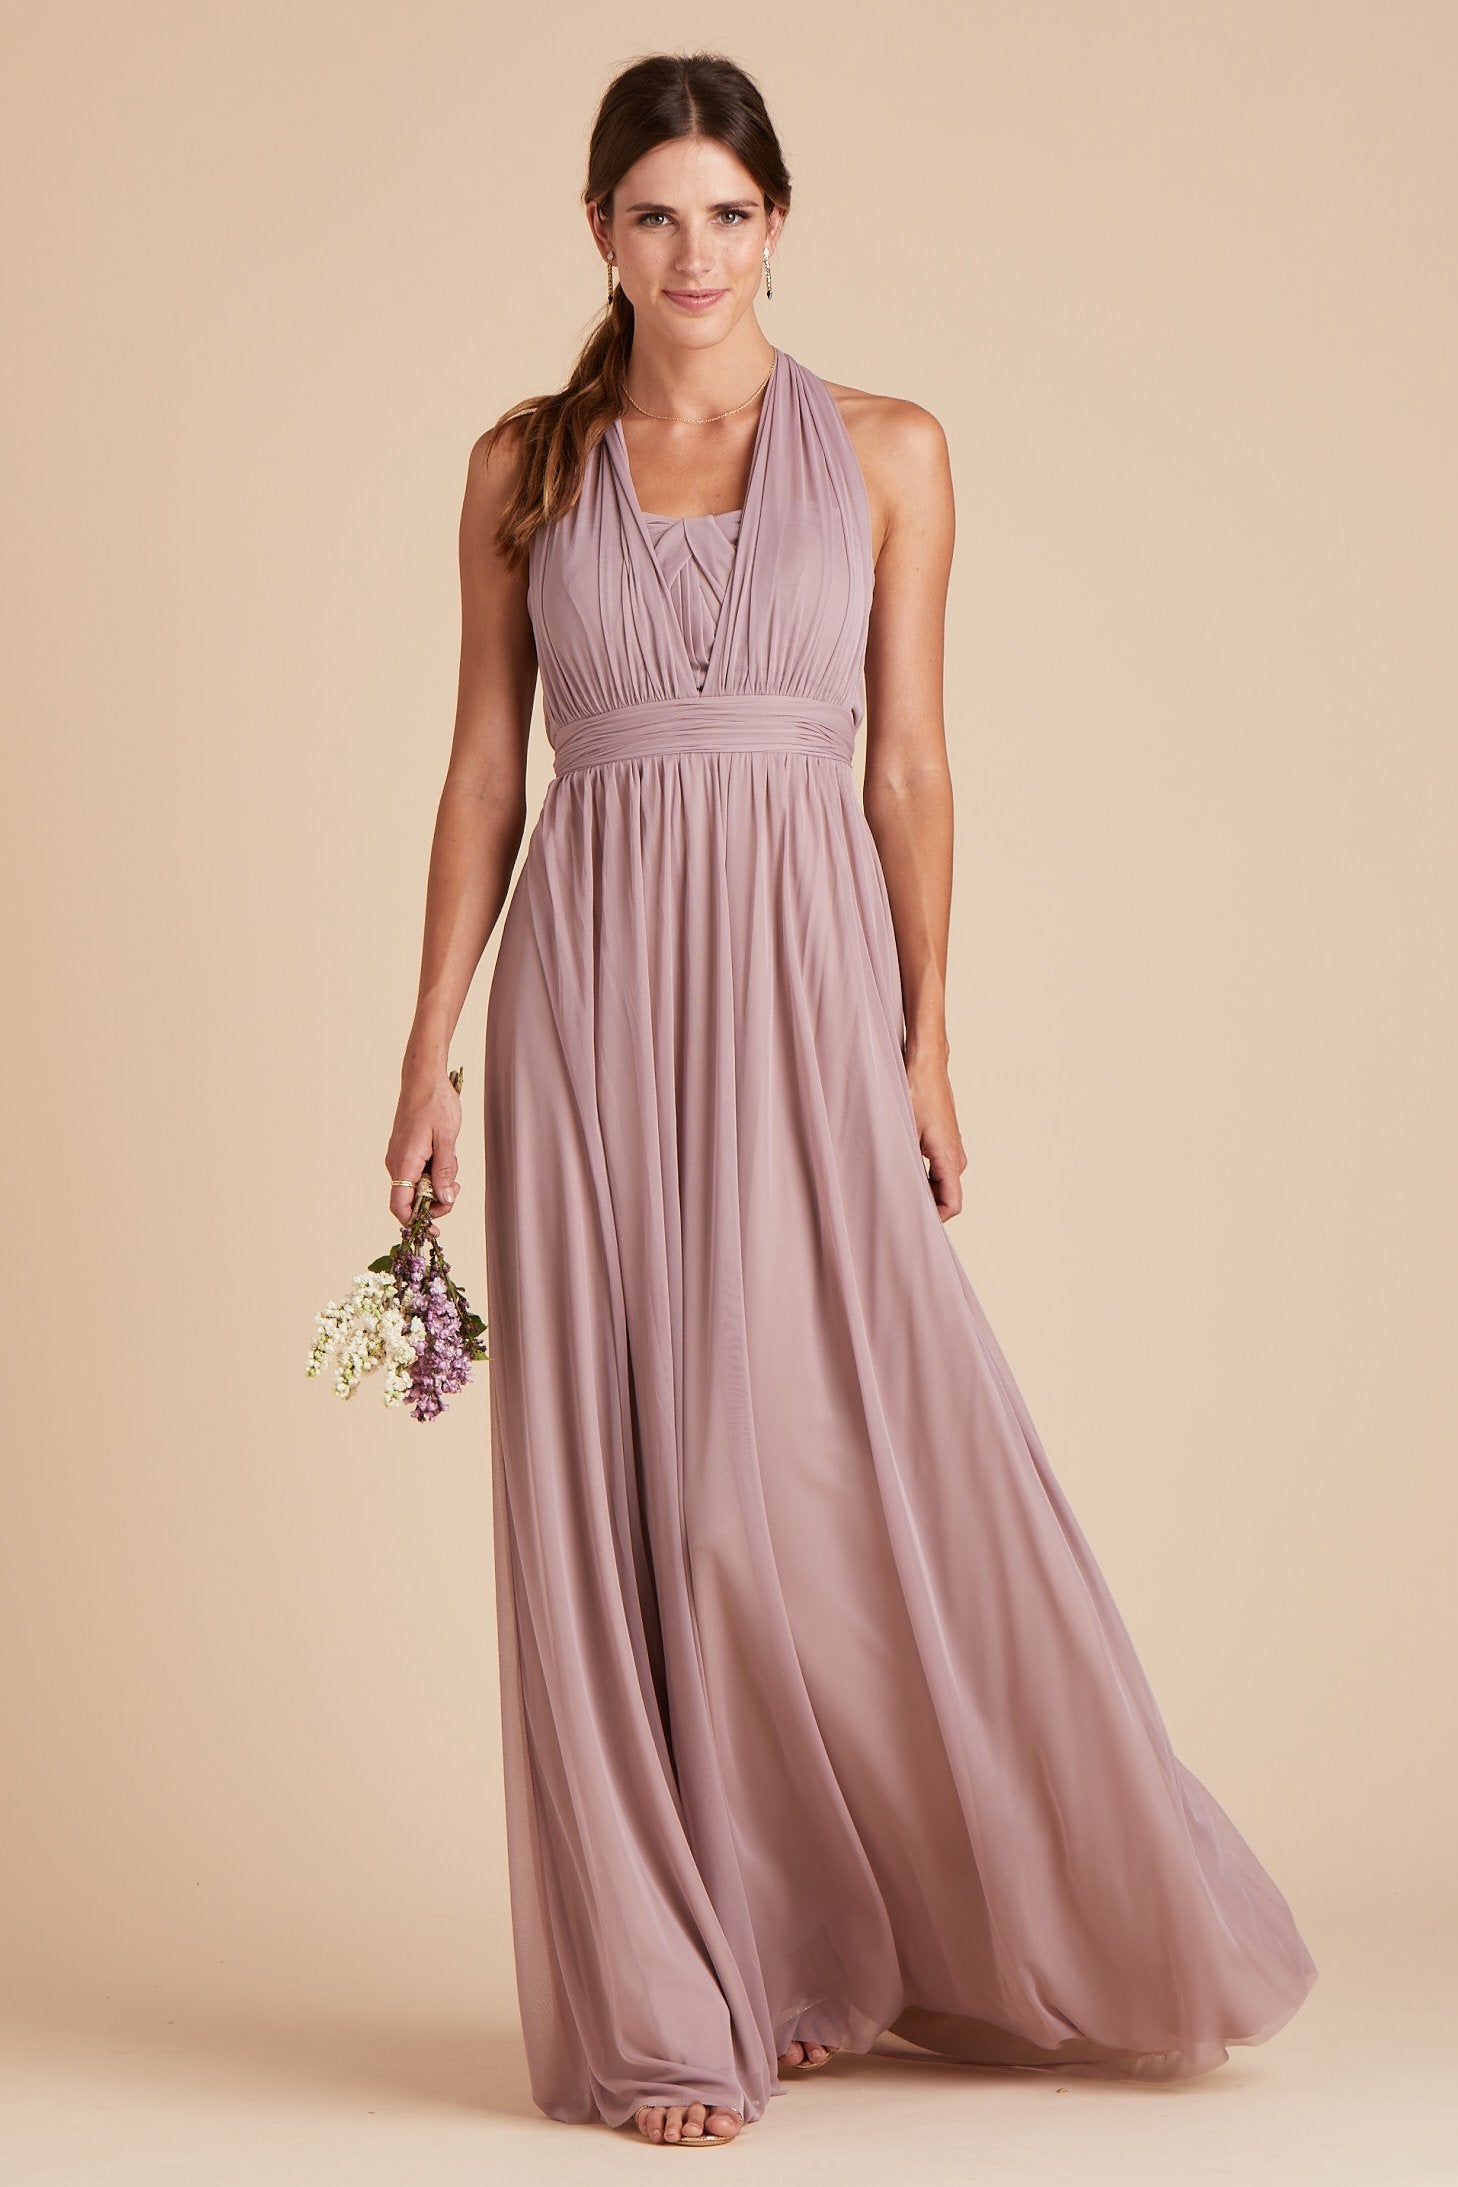 Chicky convertible bridesmaid dress in mauve purple mesh by Birdy Grey, front view